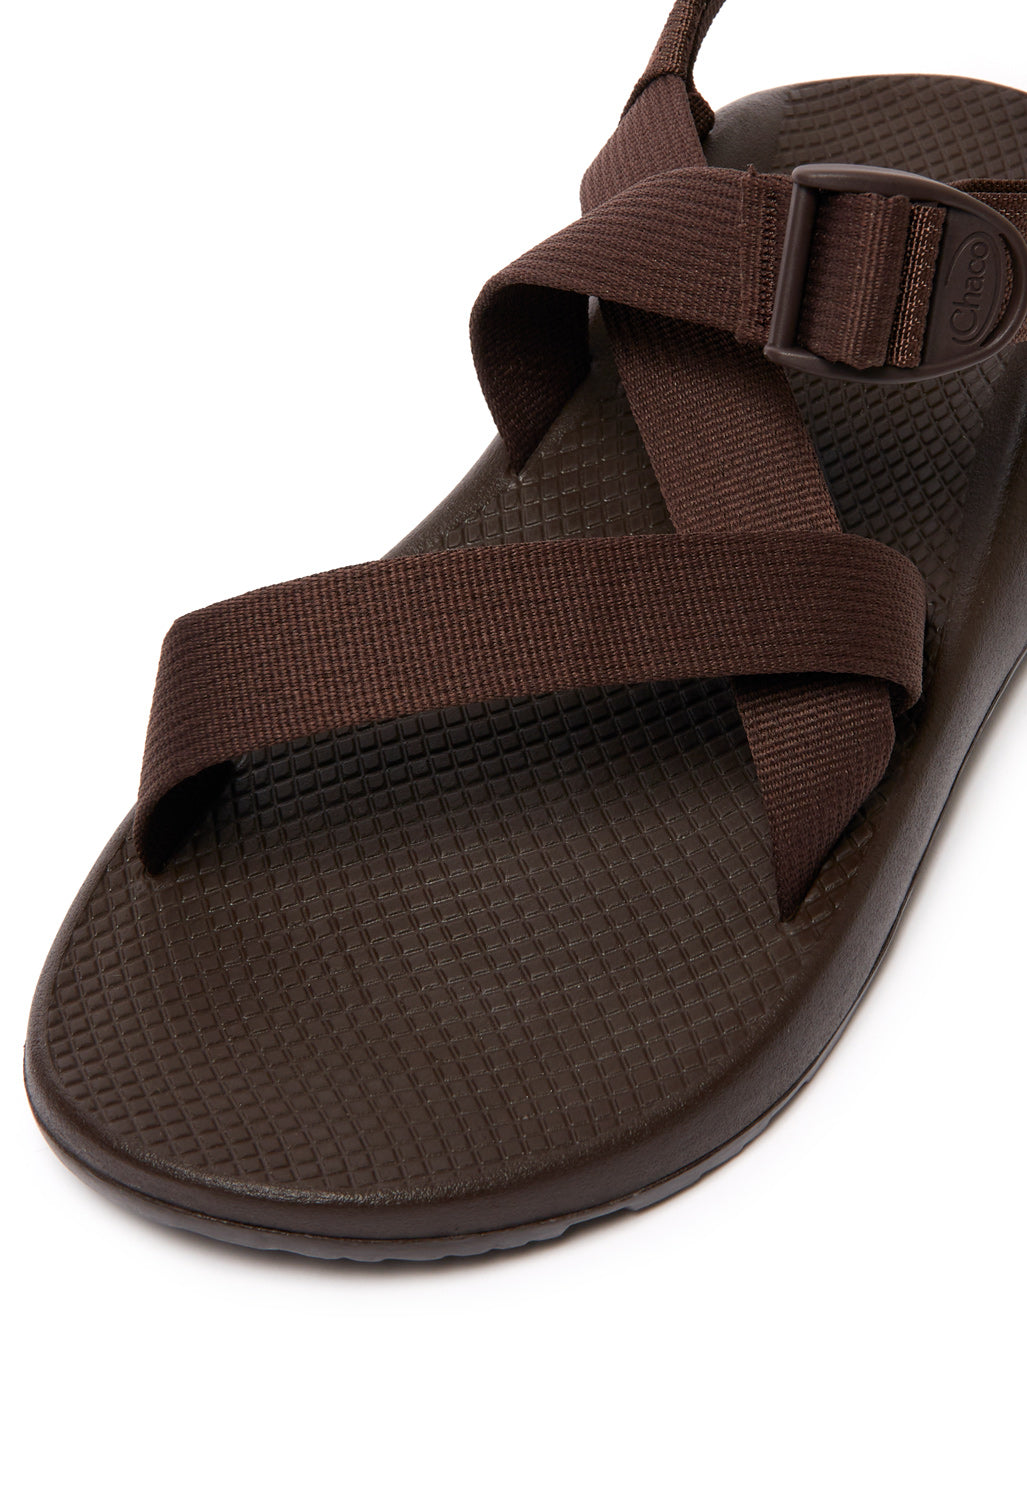 Chaco Men's Z1 Classic Sandals - Java – Outsiders Store UK